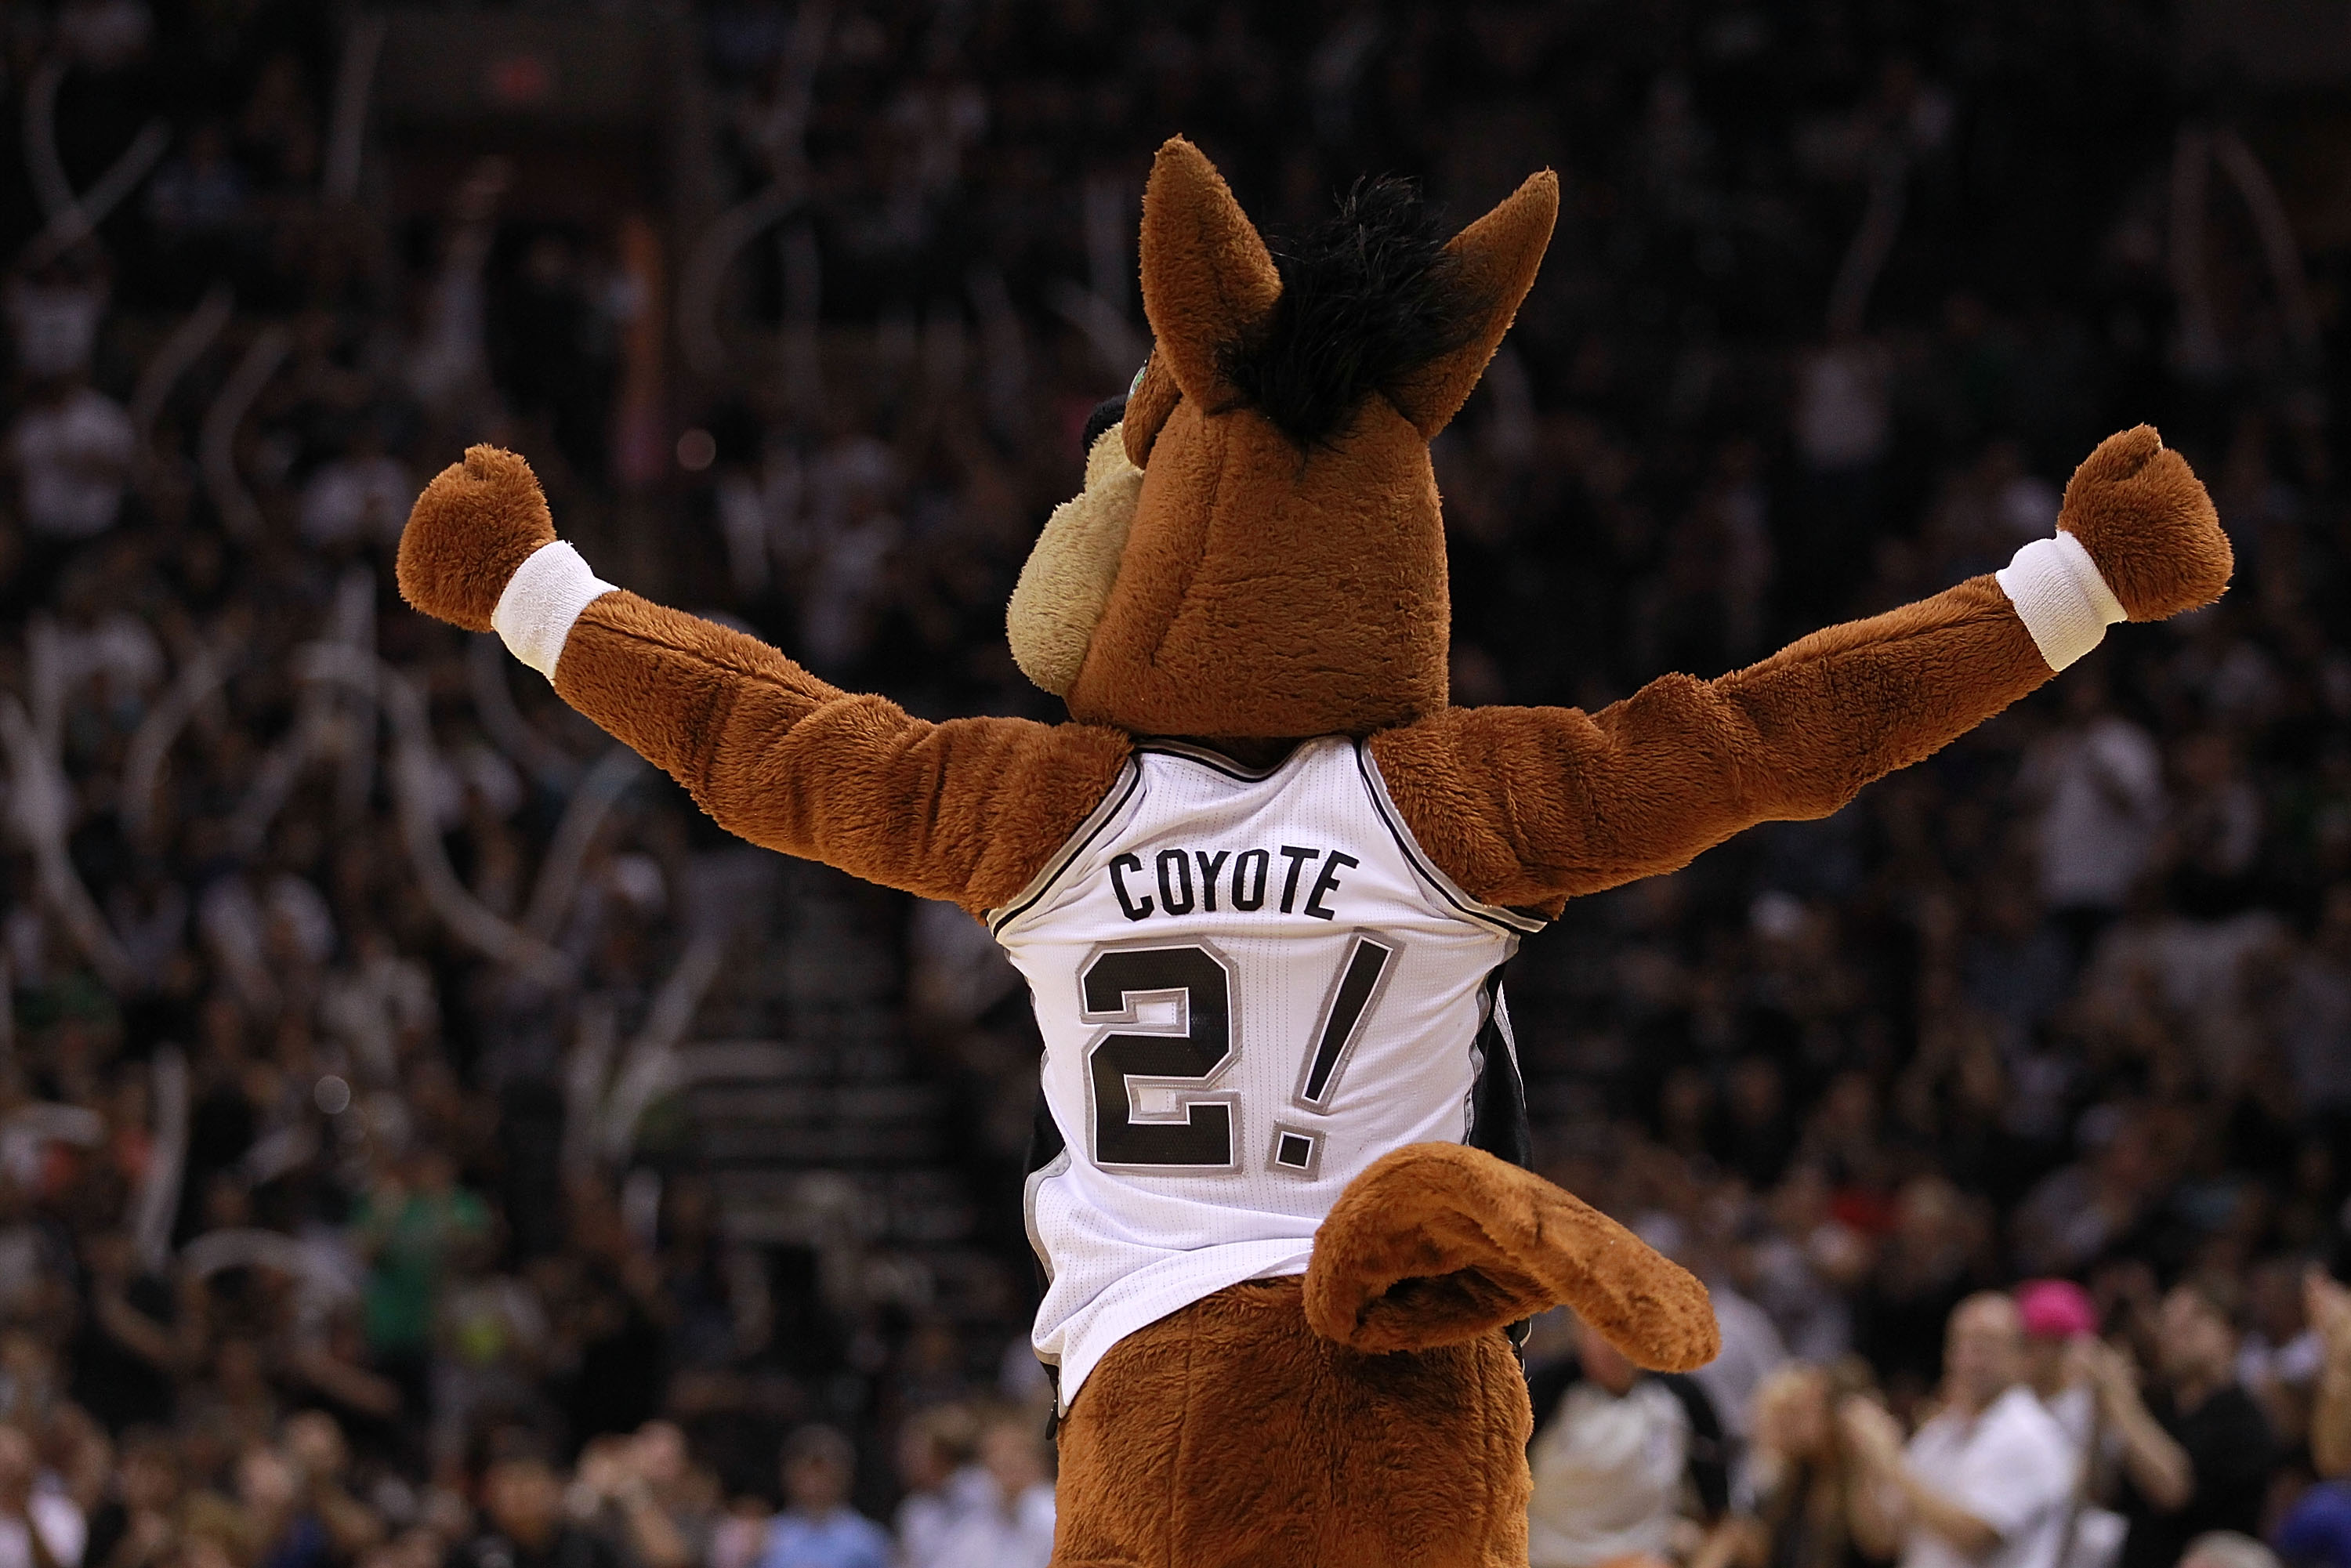 The #NBAIsBack and we want to see your favorite jersey! @spurs Coyote